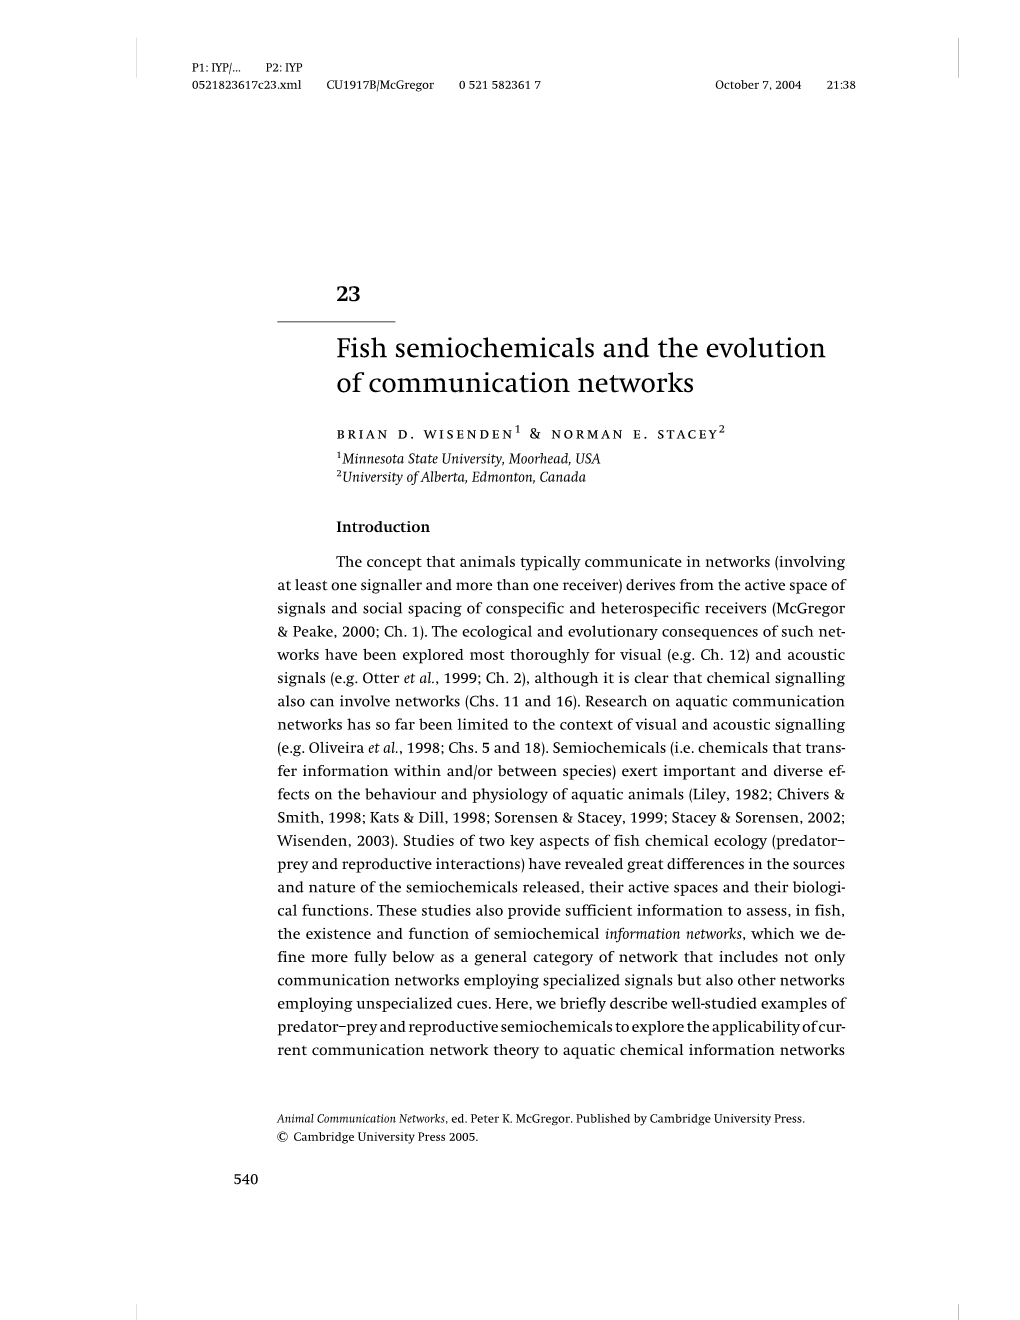 Fish Semiochemicals and the Evolution of Communication Networks